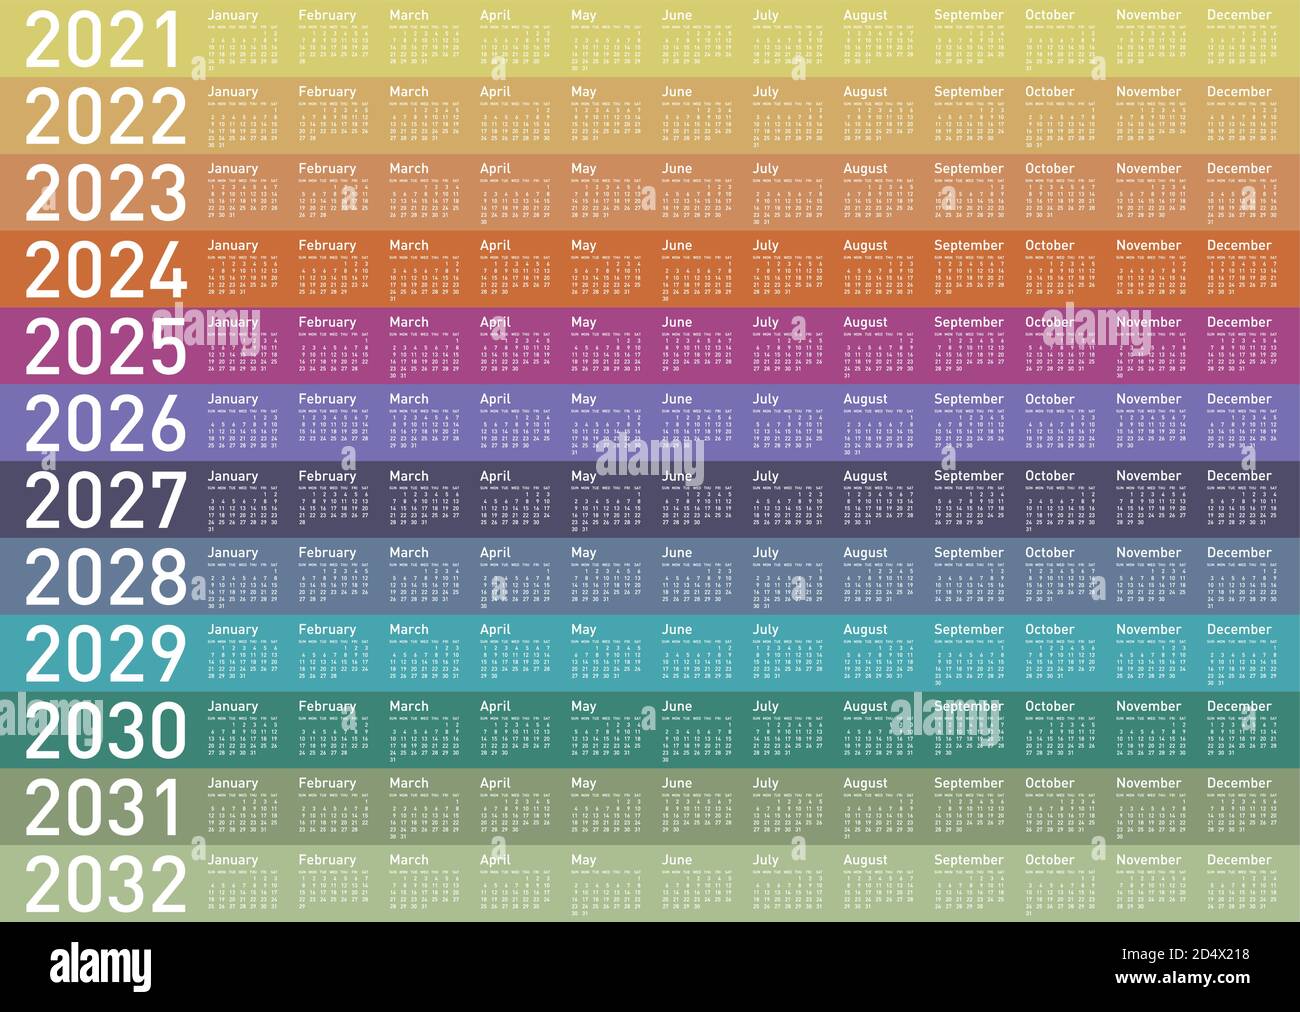 Colorful Calendar for Years 2021, 2022, 2023, 2024, 2025, 2026, 2027